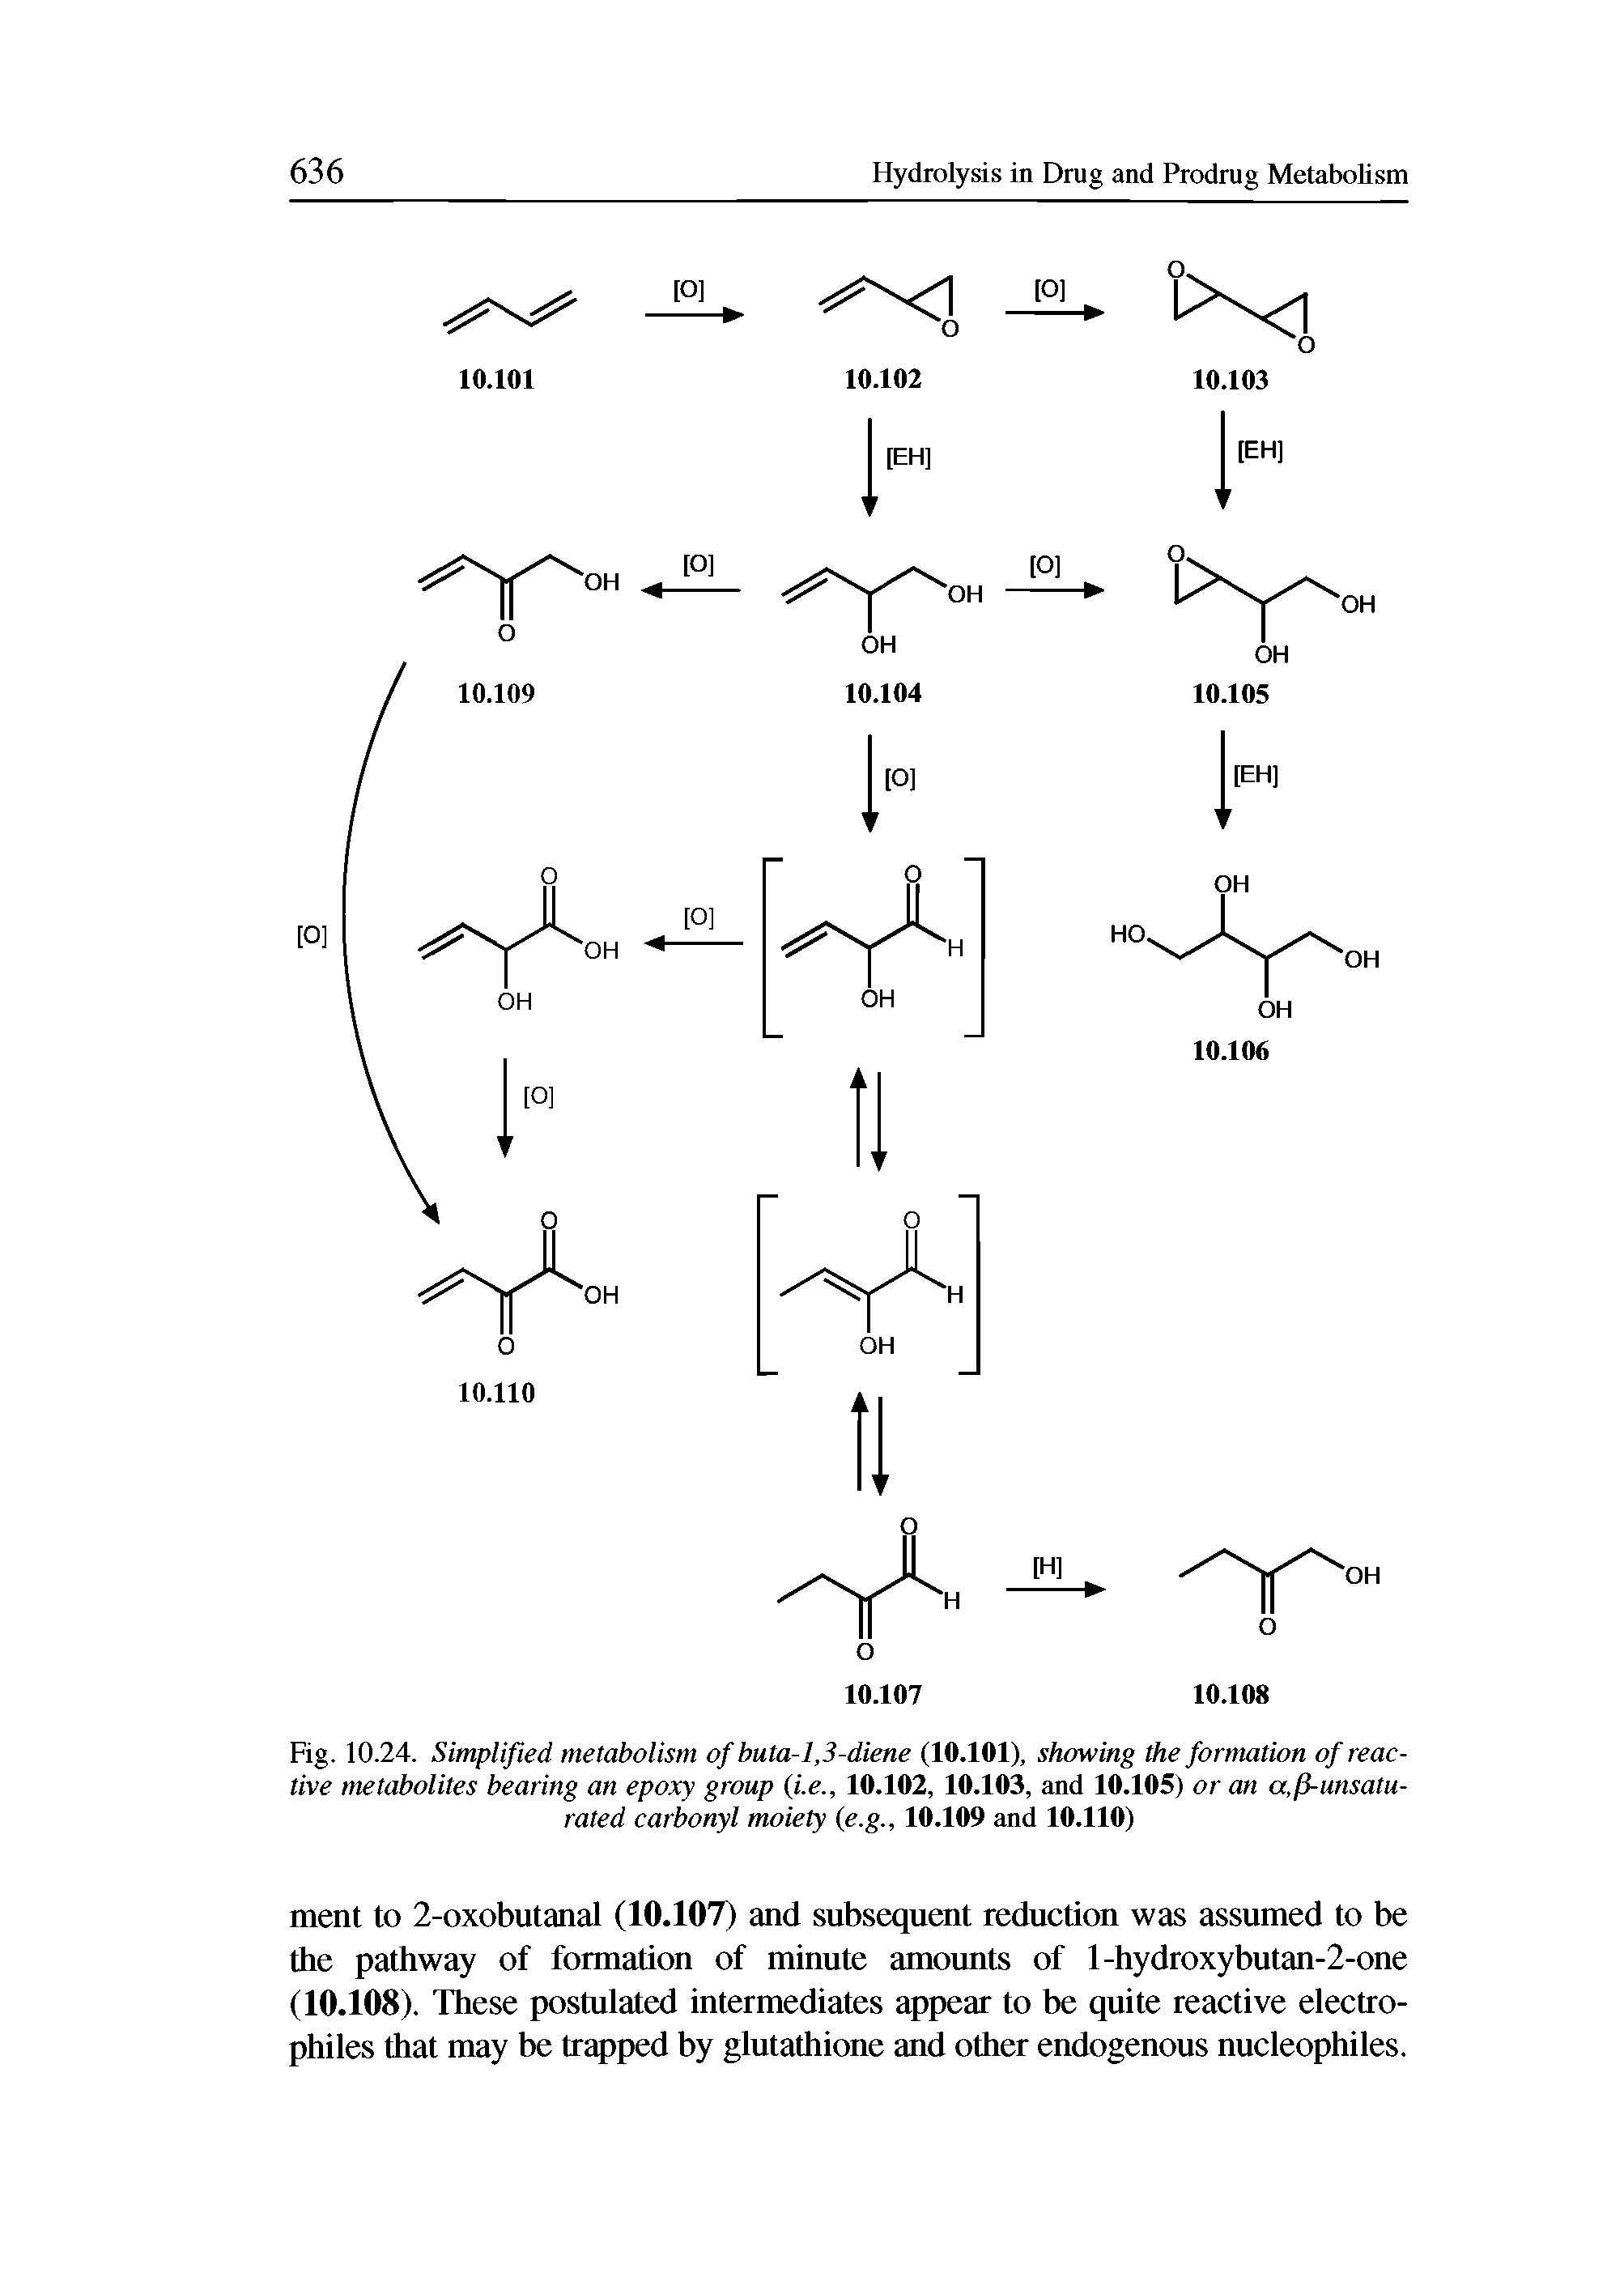 Fig. 10.24. Simplified metabolism of buta-1,3-diene (10.101), showing the formation of reactive metabolites bearing an epoxy group (i.e., 10.102, 10.103, and 10.105) or an a,(5-unsatu-rated carbonyl moiety (e.g., 10.109 and 10.110)...